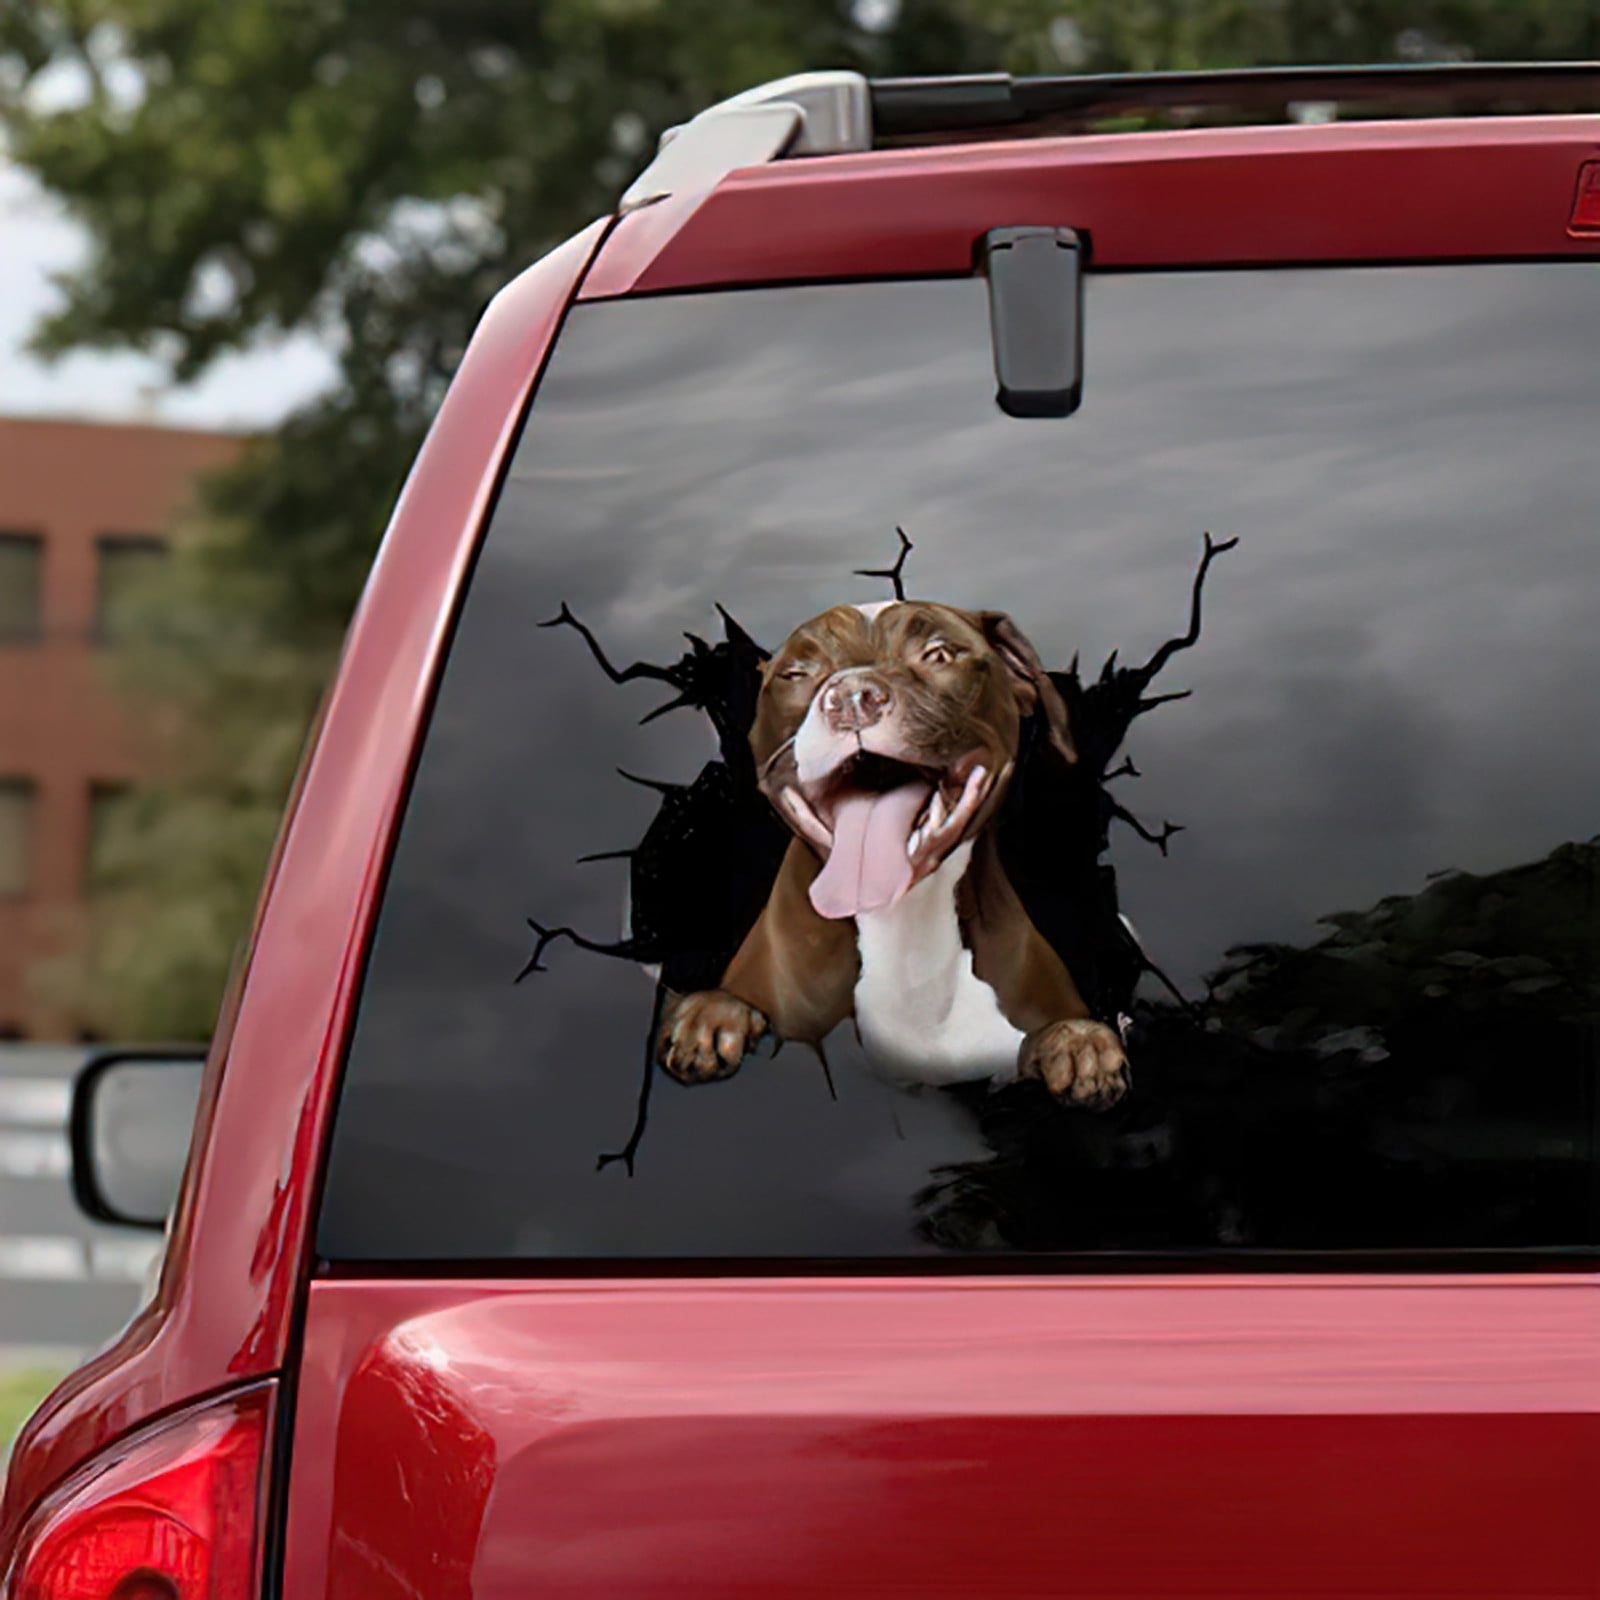 USMC BULL DOG STICKER VINYL GRAPHIC DECAL CHOOSE YOUR OWN SIZE 